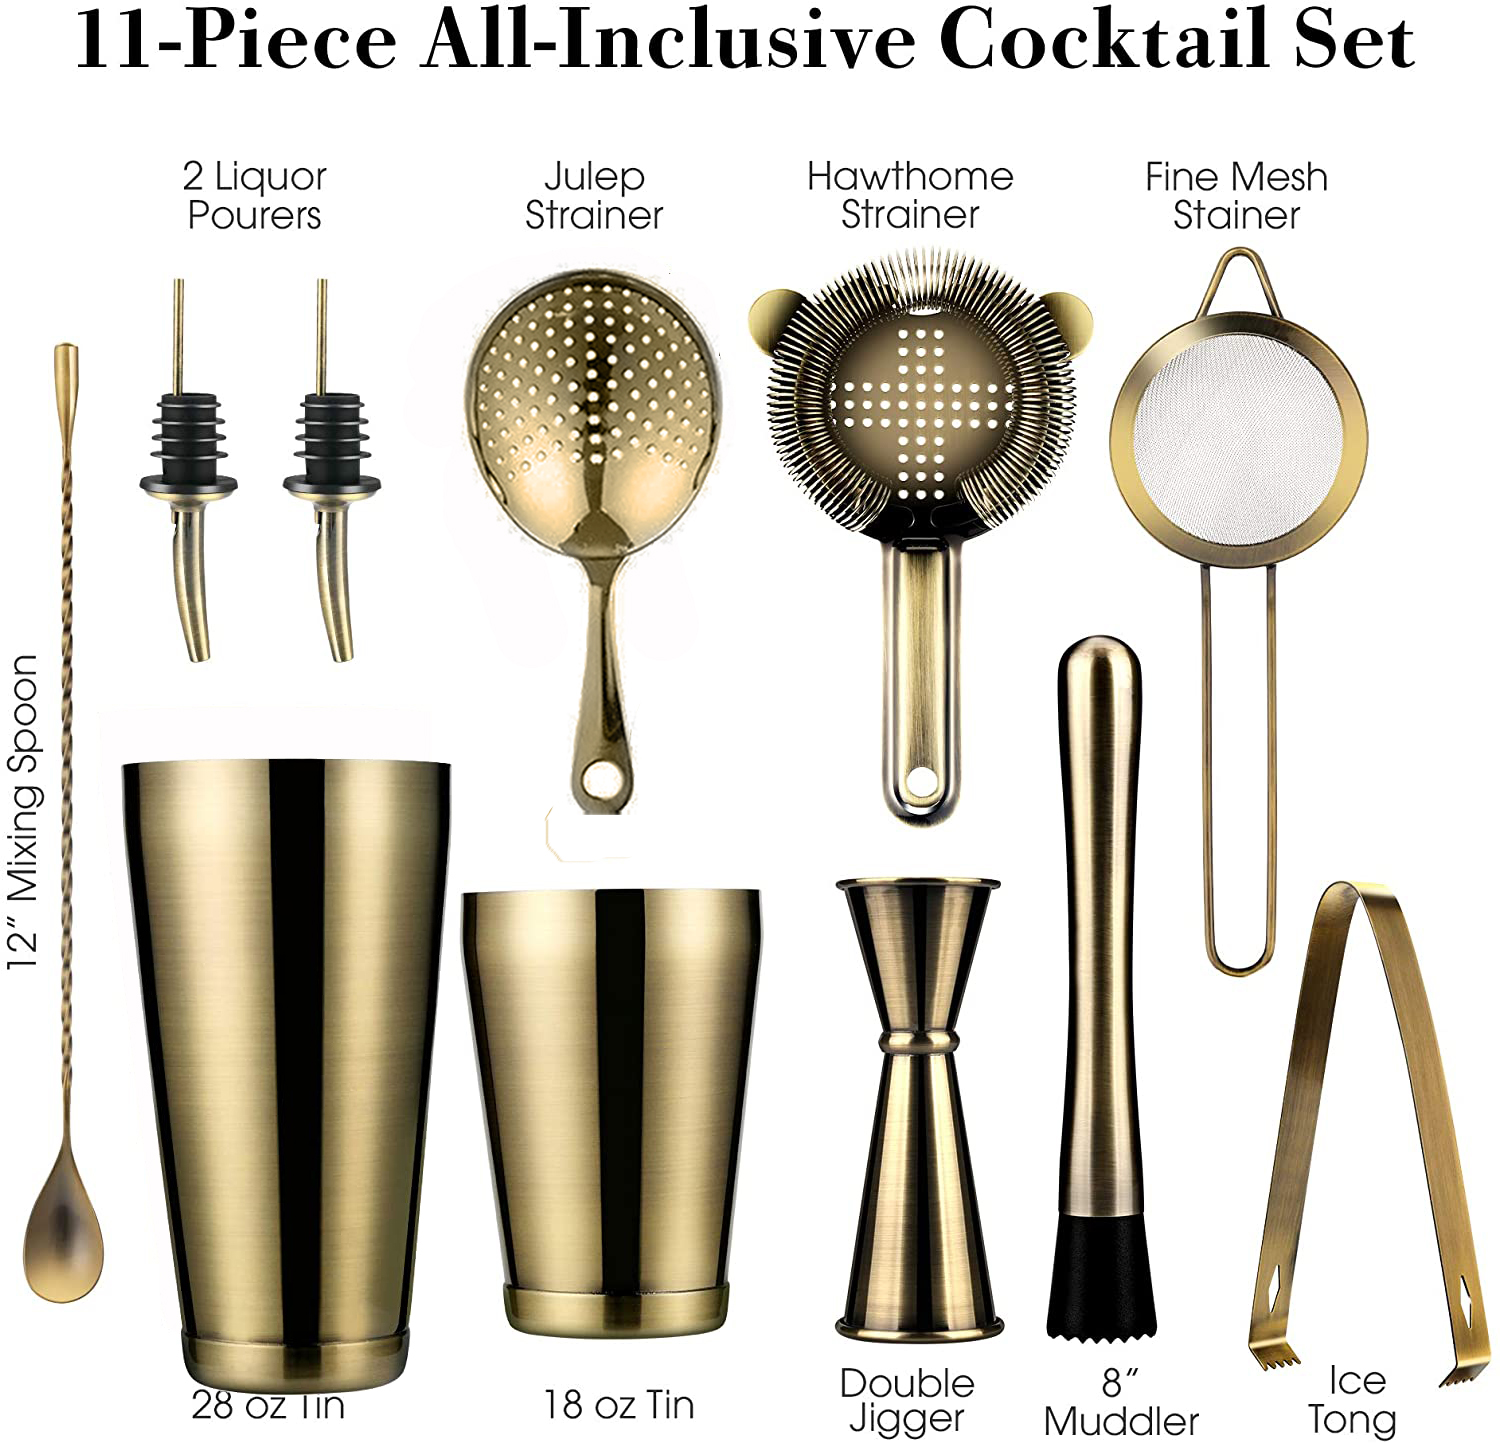 11-Piece Cocktail Shaker Bar Set: Weighted Boston Shakers,Cocktail Strainer Set,Jigger, Cocktail Muddler,Spoon, Ice Tong,Pourers